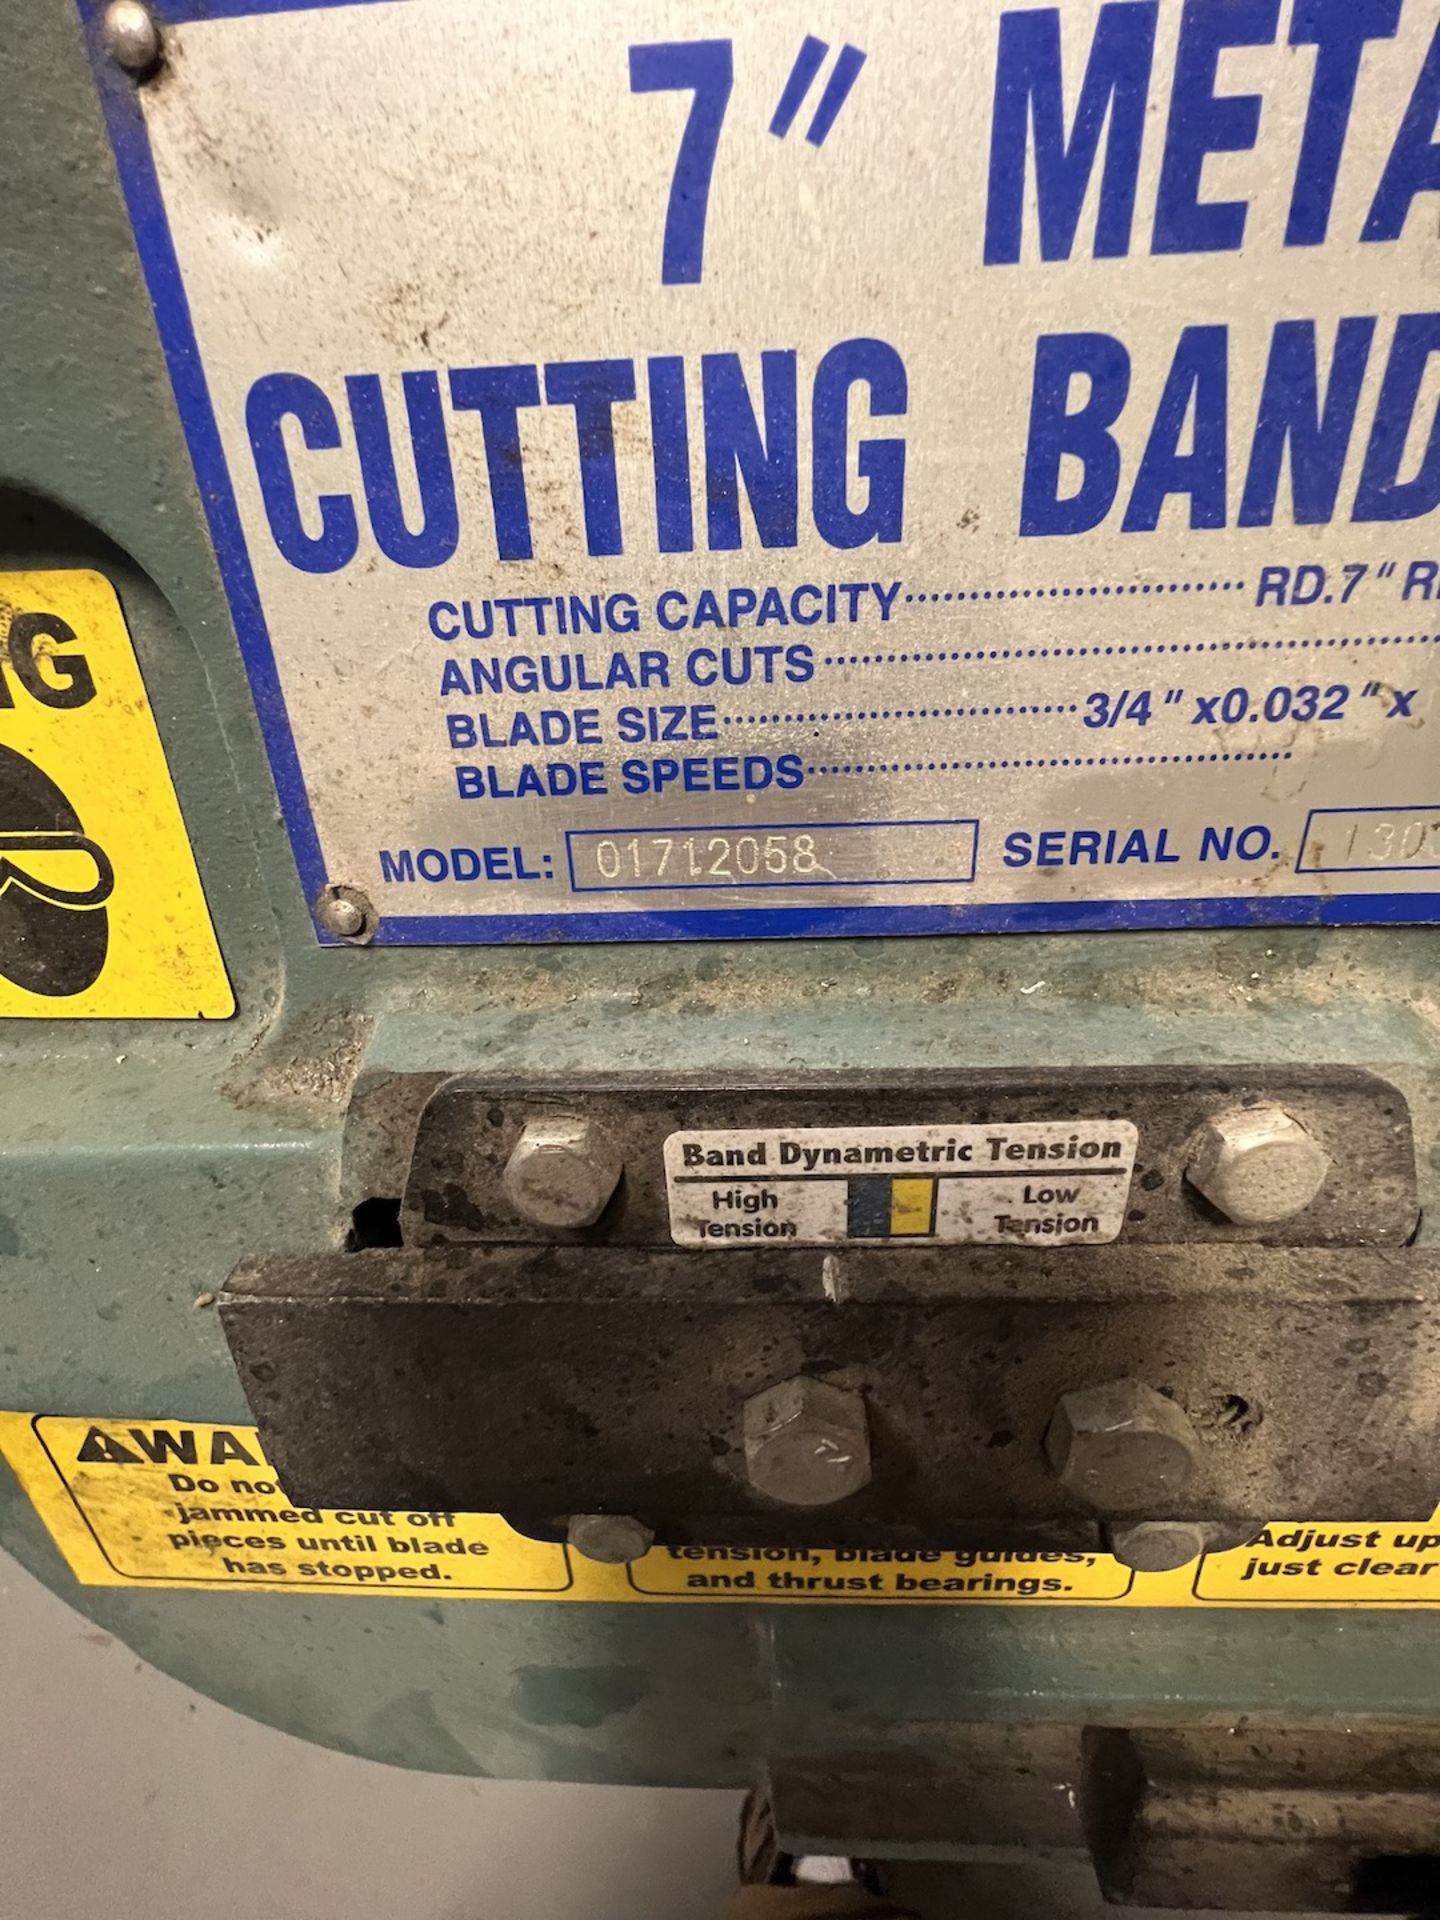 TURN-PRO 7 IN. CUTTING BAND SAW, MODEL 01712058, S/N 13031002, CUTTING CAPACITY RD. 7 IN., RECT 7 - Image 3 of 5